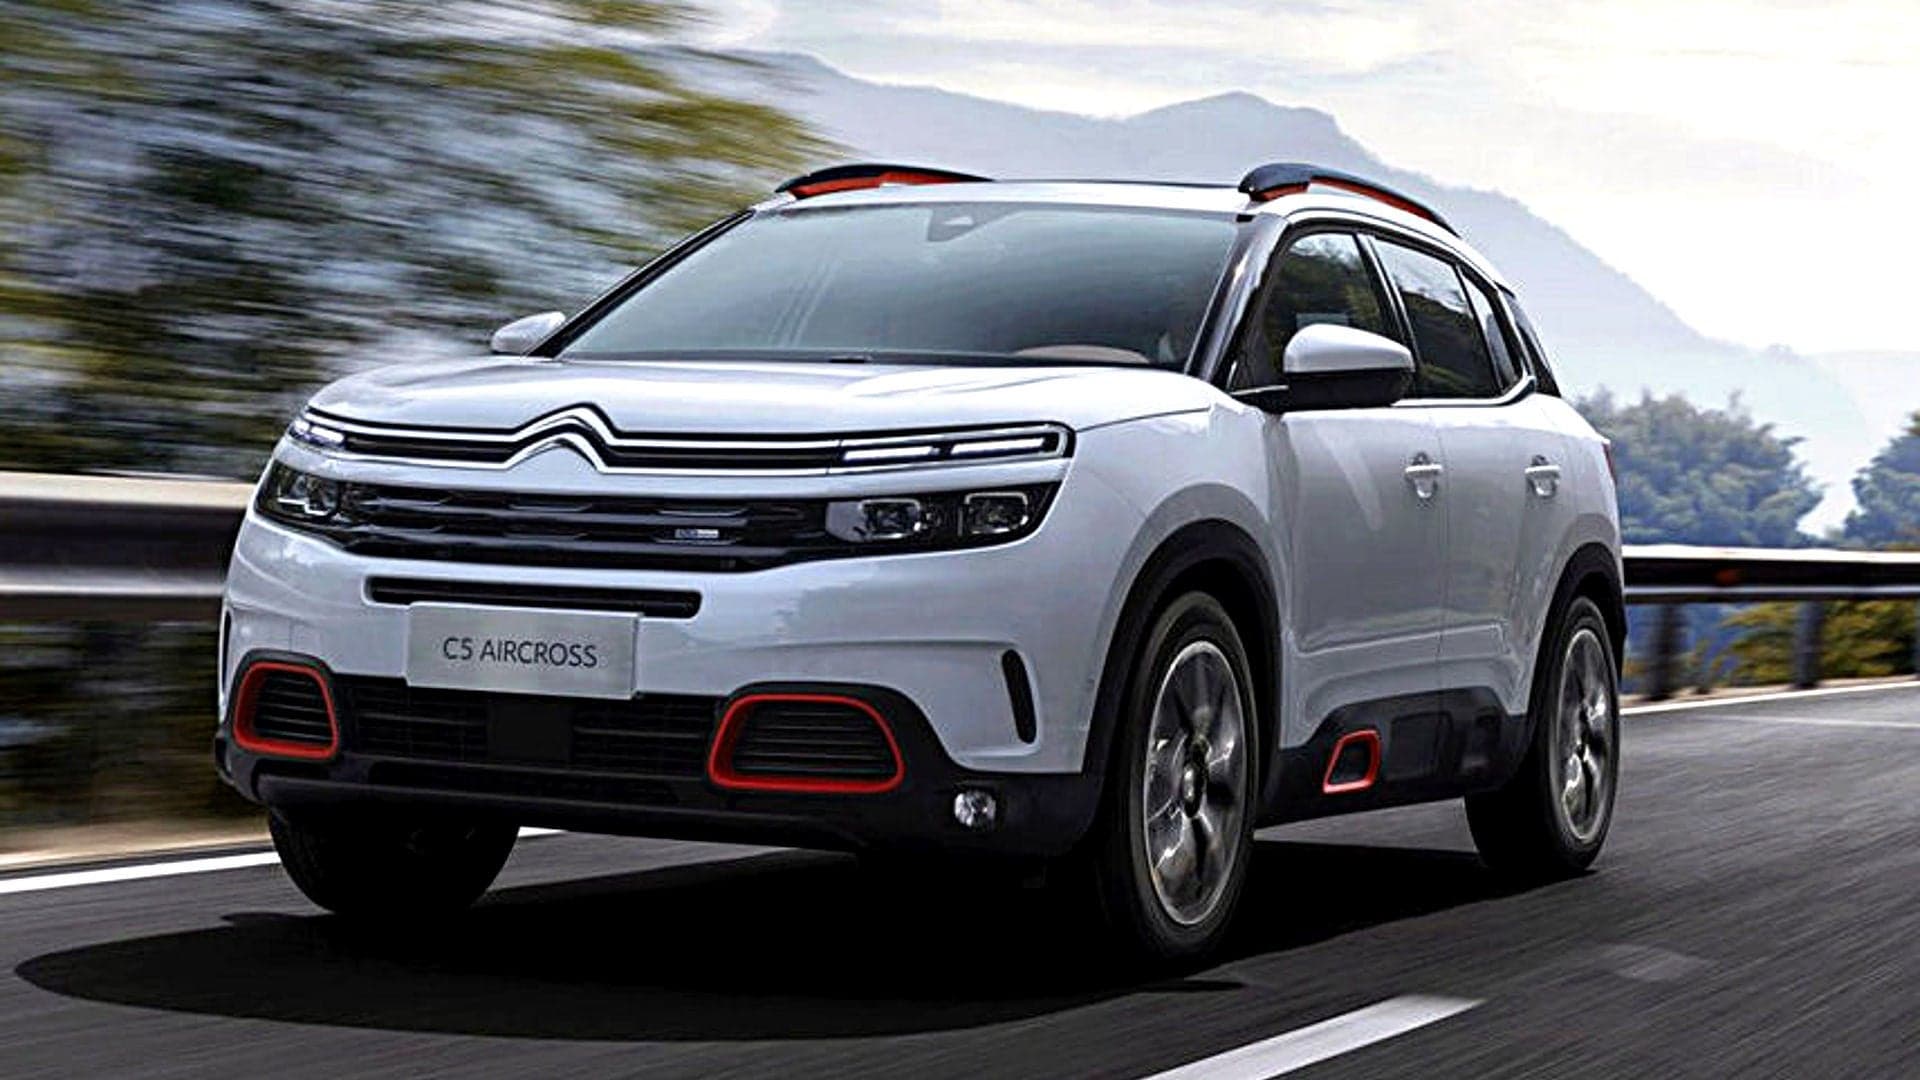 Citroën’s Most Powerful Car Ever Is This New Hybrid